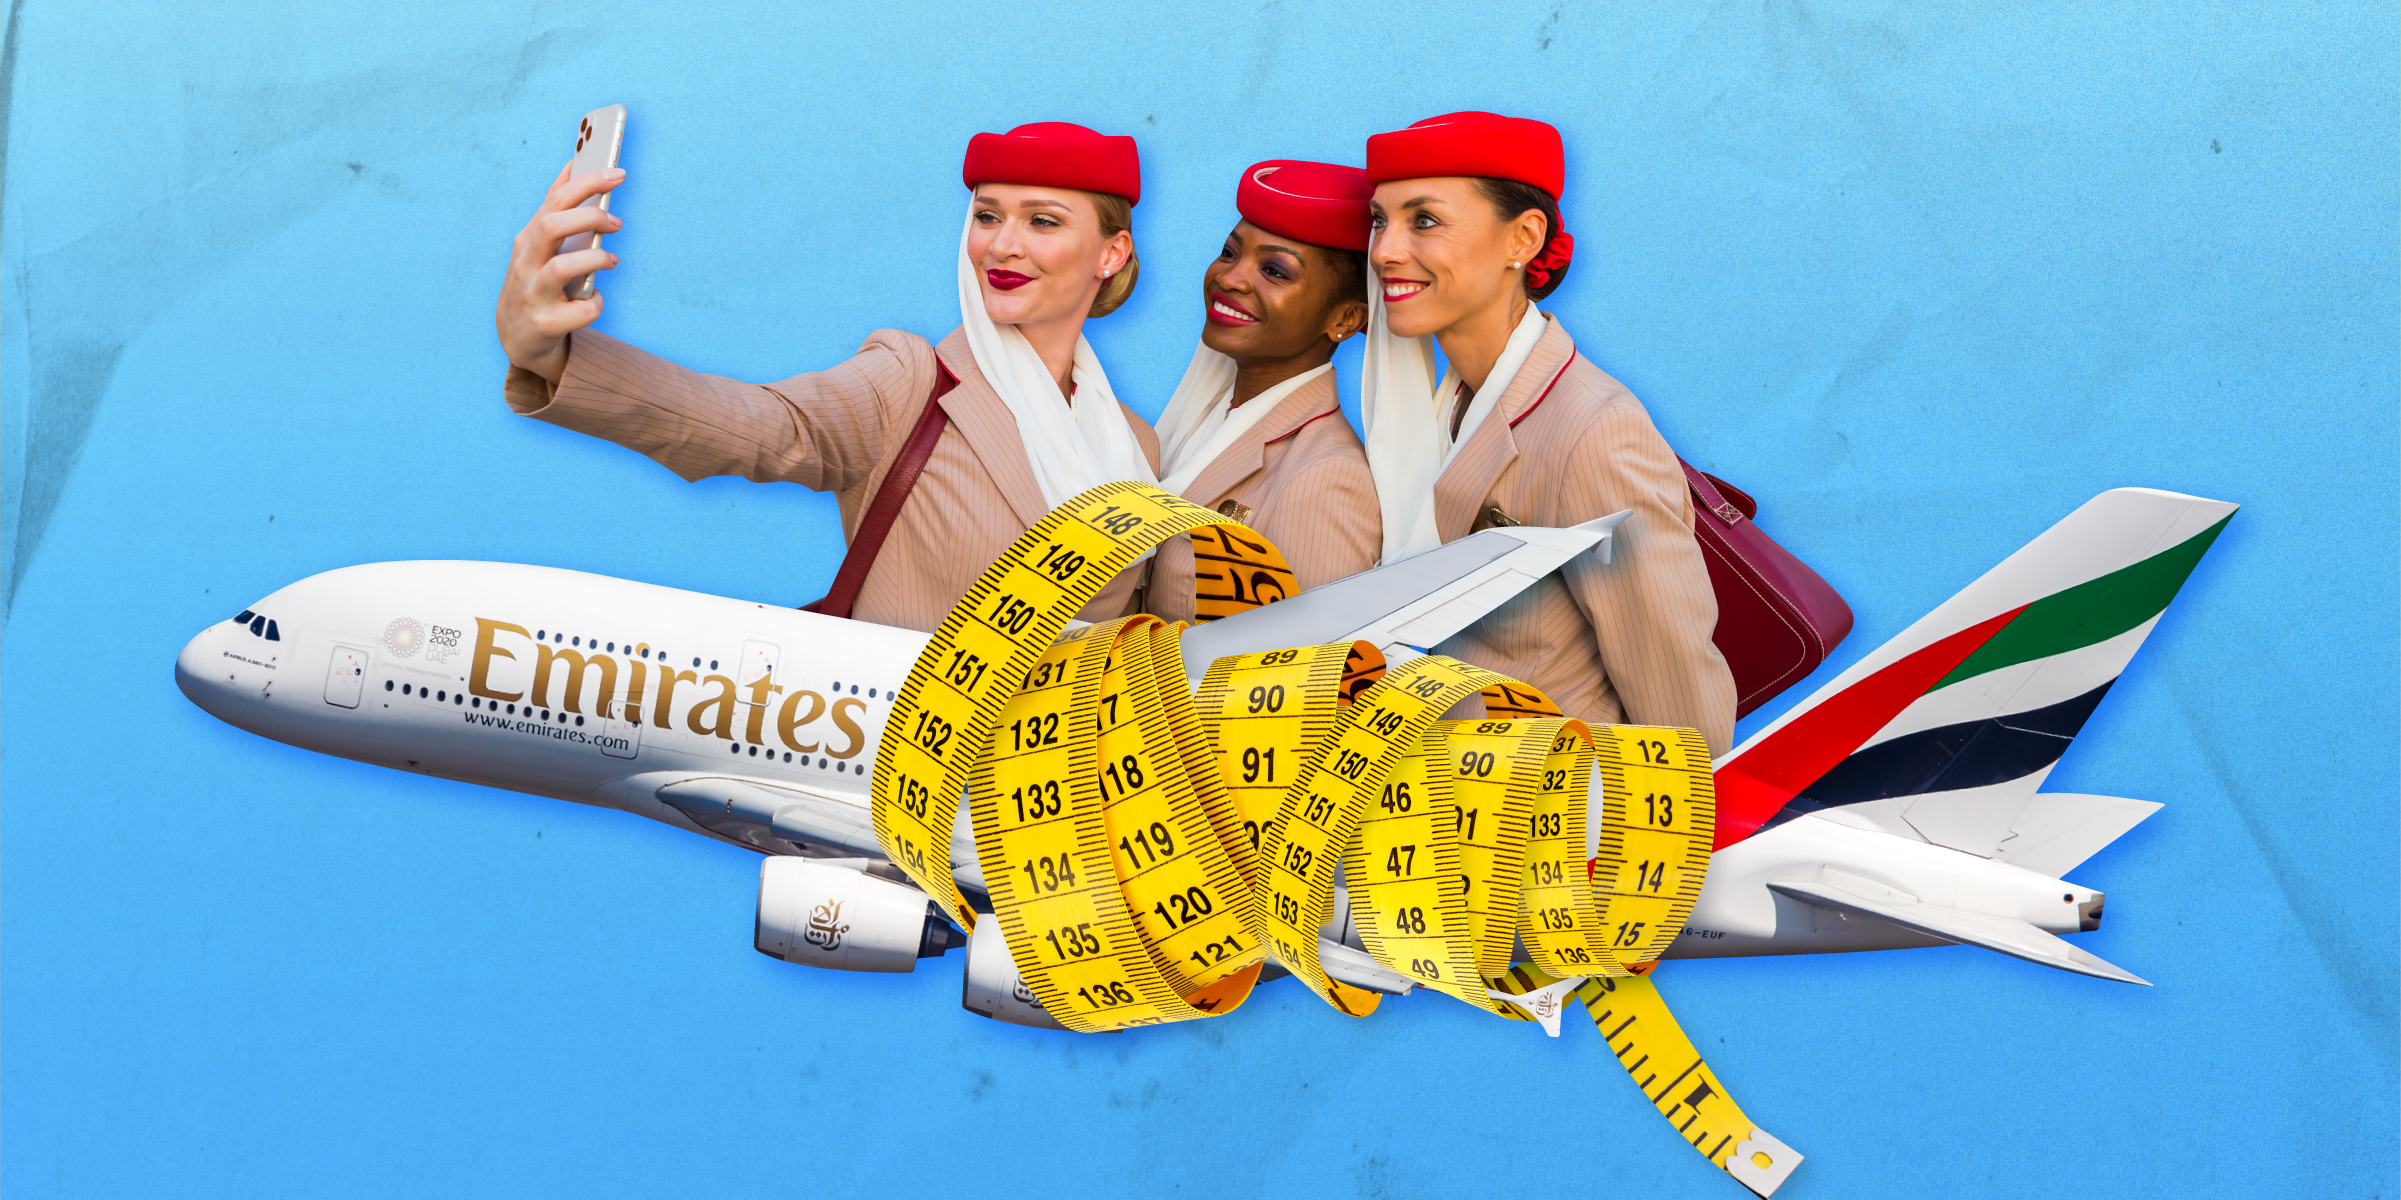 Tape measure wrapped around Emirates airplane with flight attendants taking a selfie 2x1